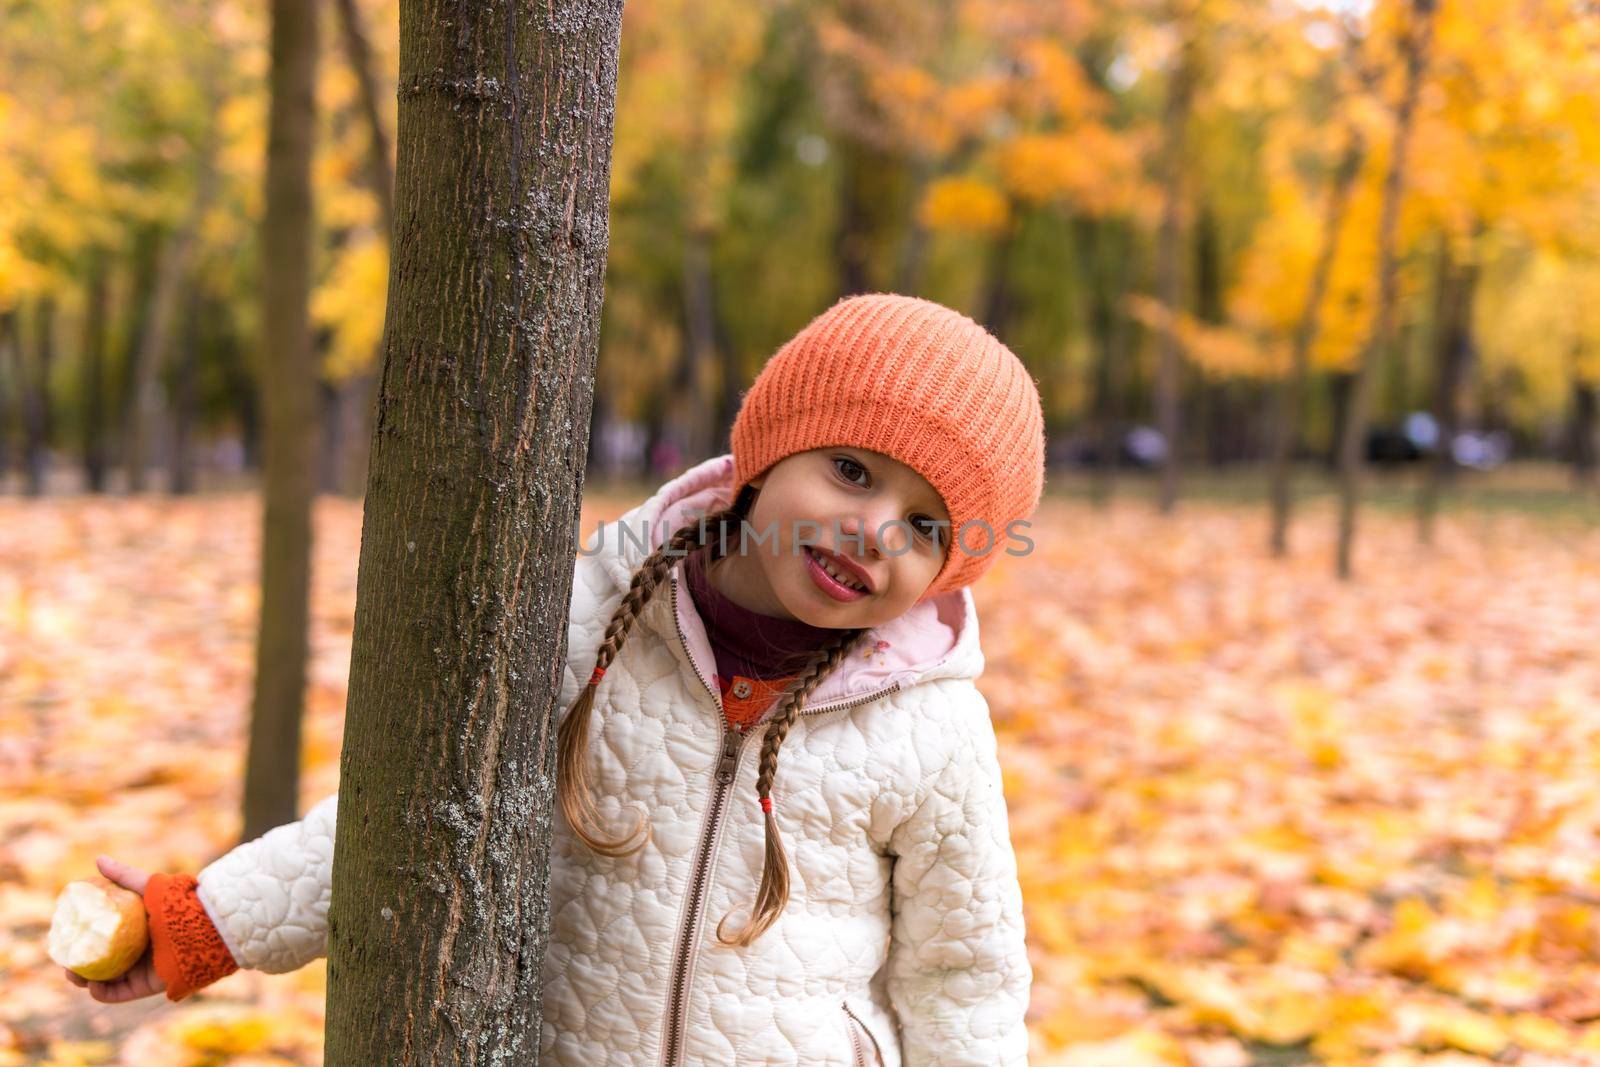 One happy funny child kid Girl orande Hat walking in park forest enjoying autumn fall nature weather. siblings Kid Collect falling leaves in baskets, playing hiding tree play hide and seek together.